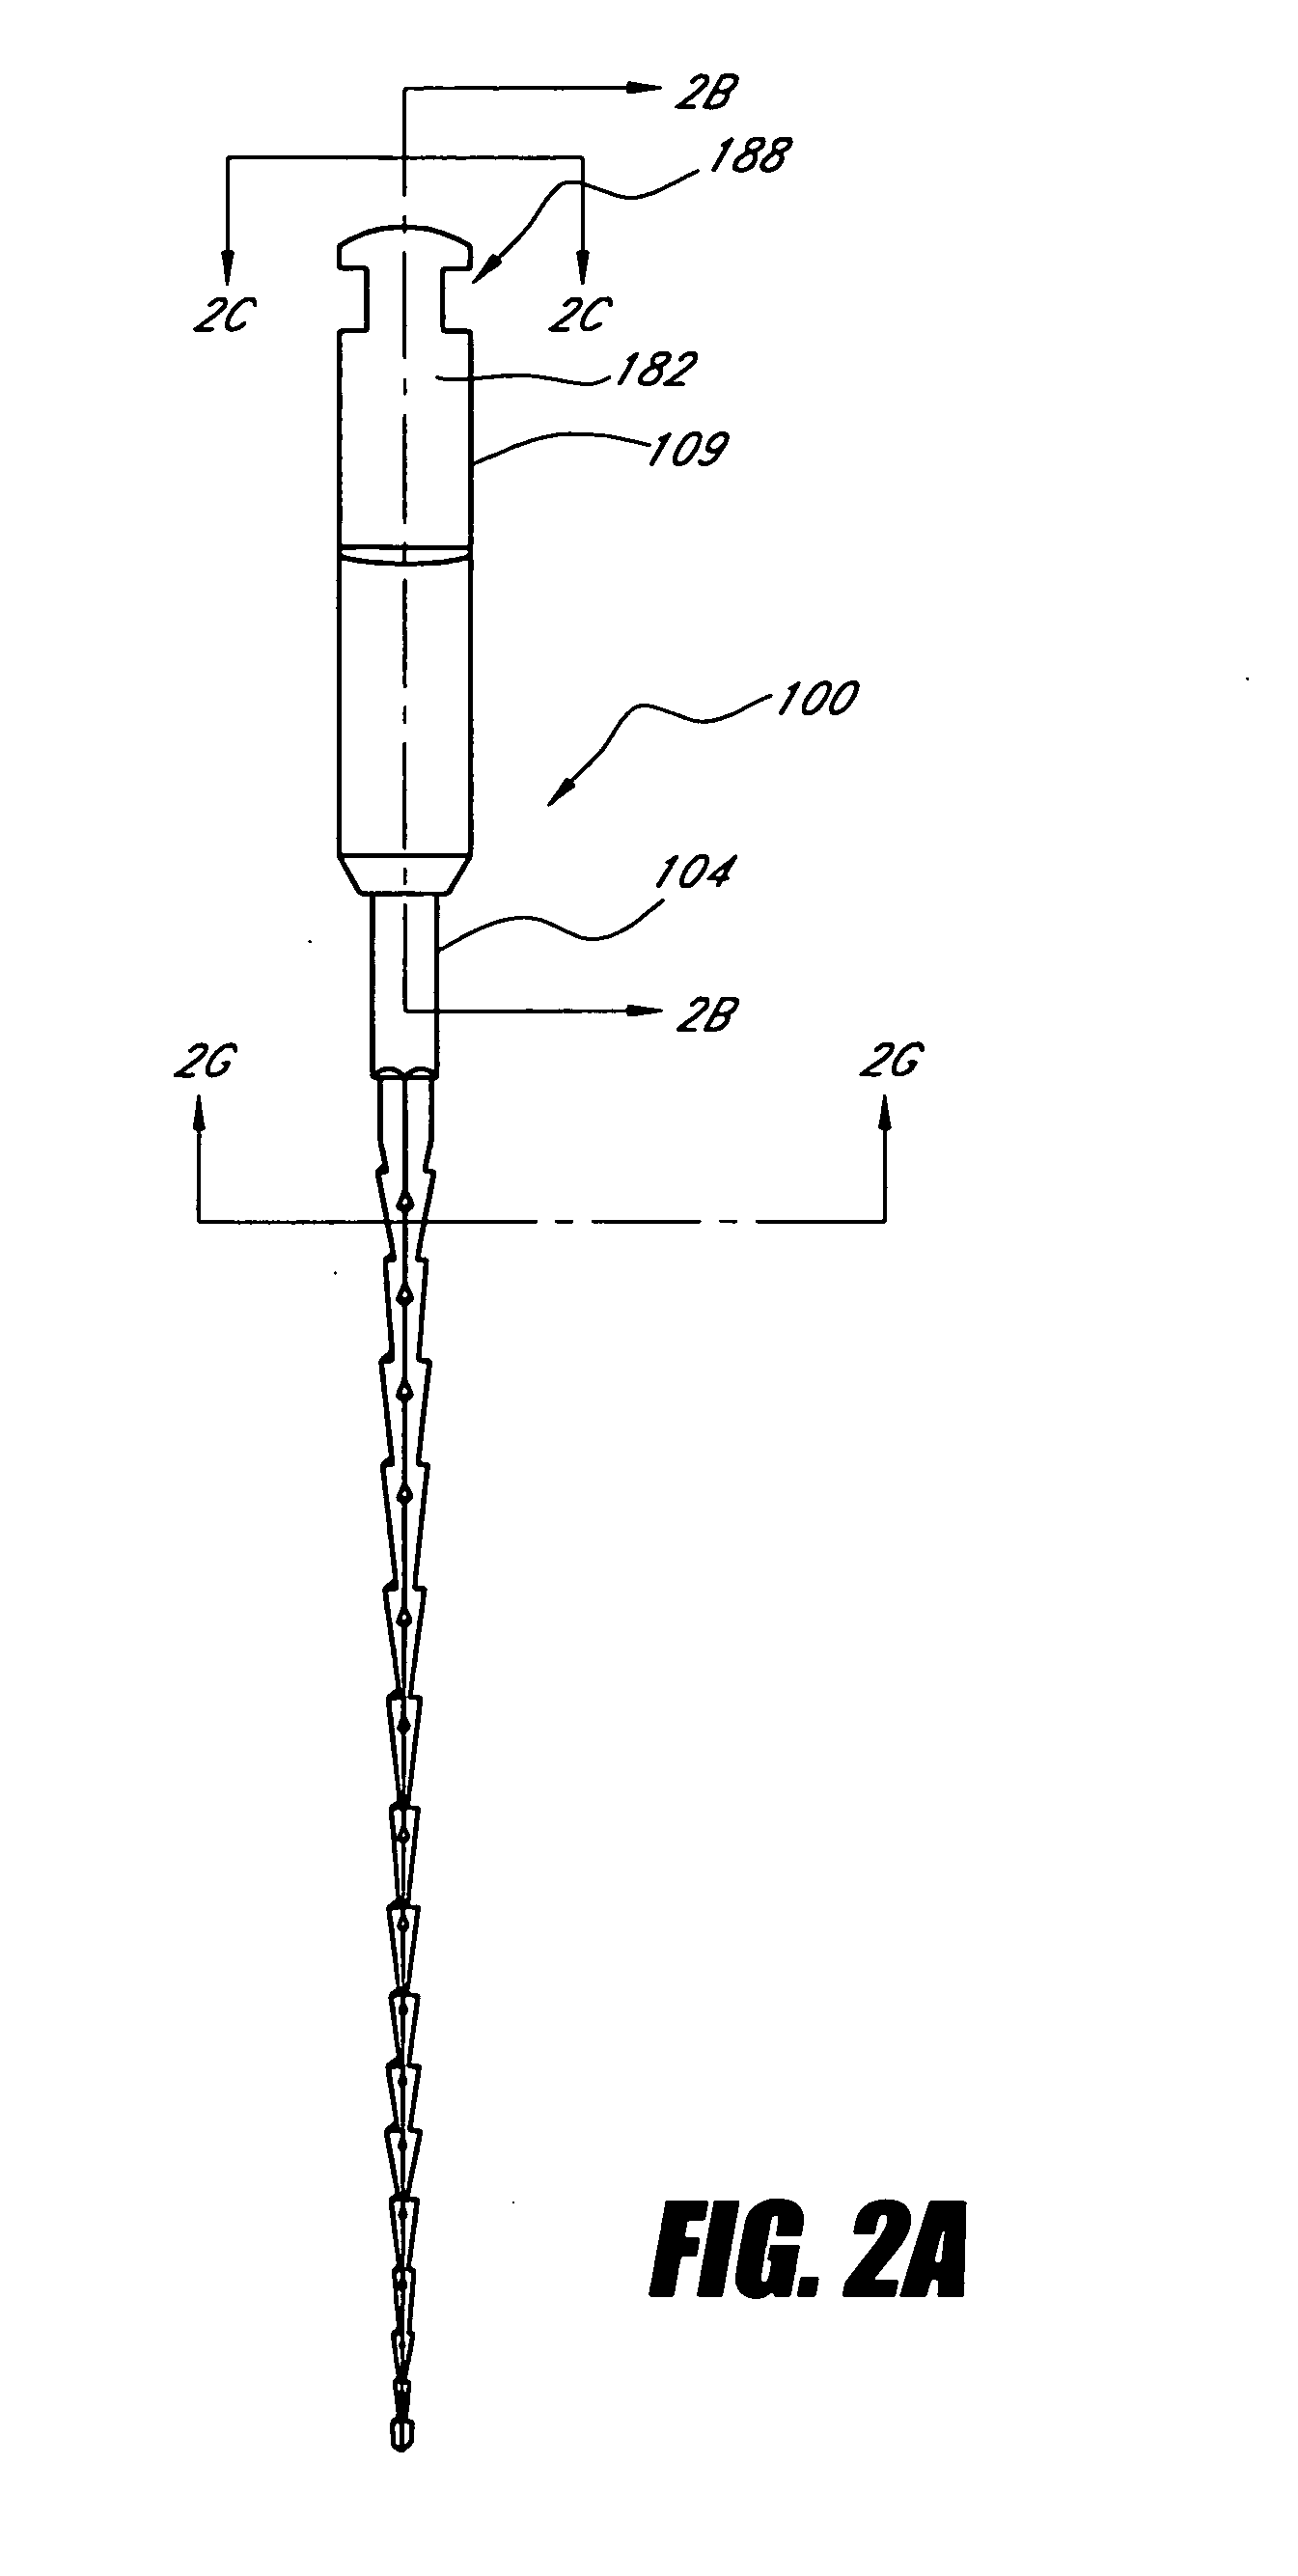 Endodontic instrument having notched cutting surfaces